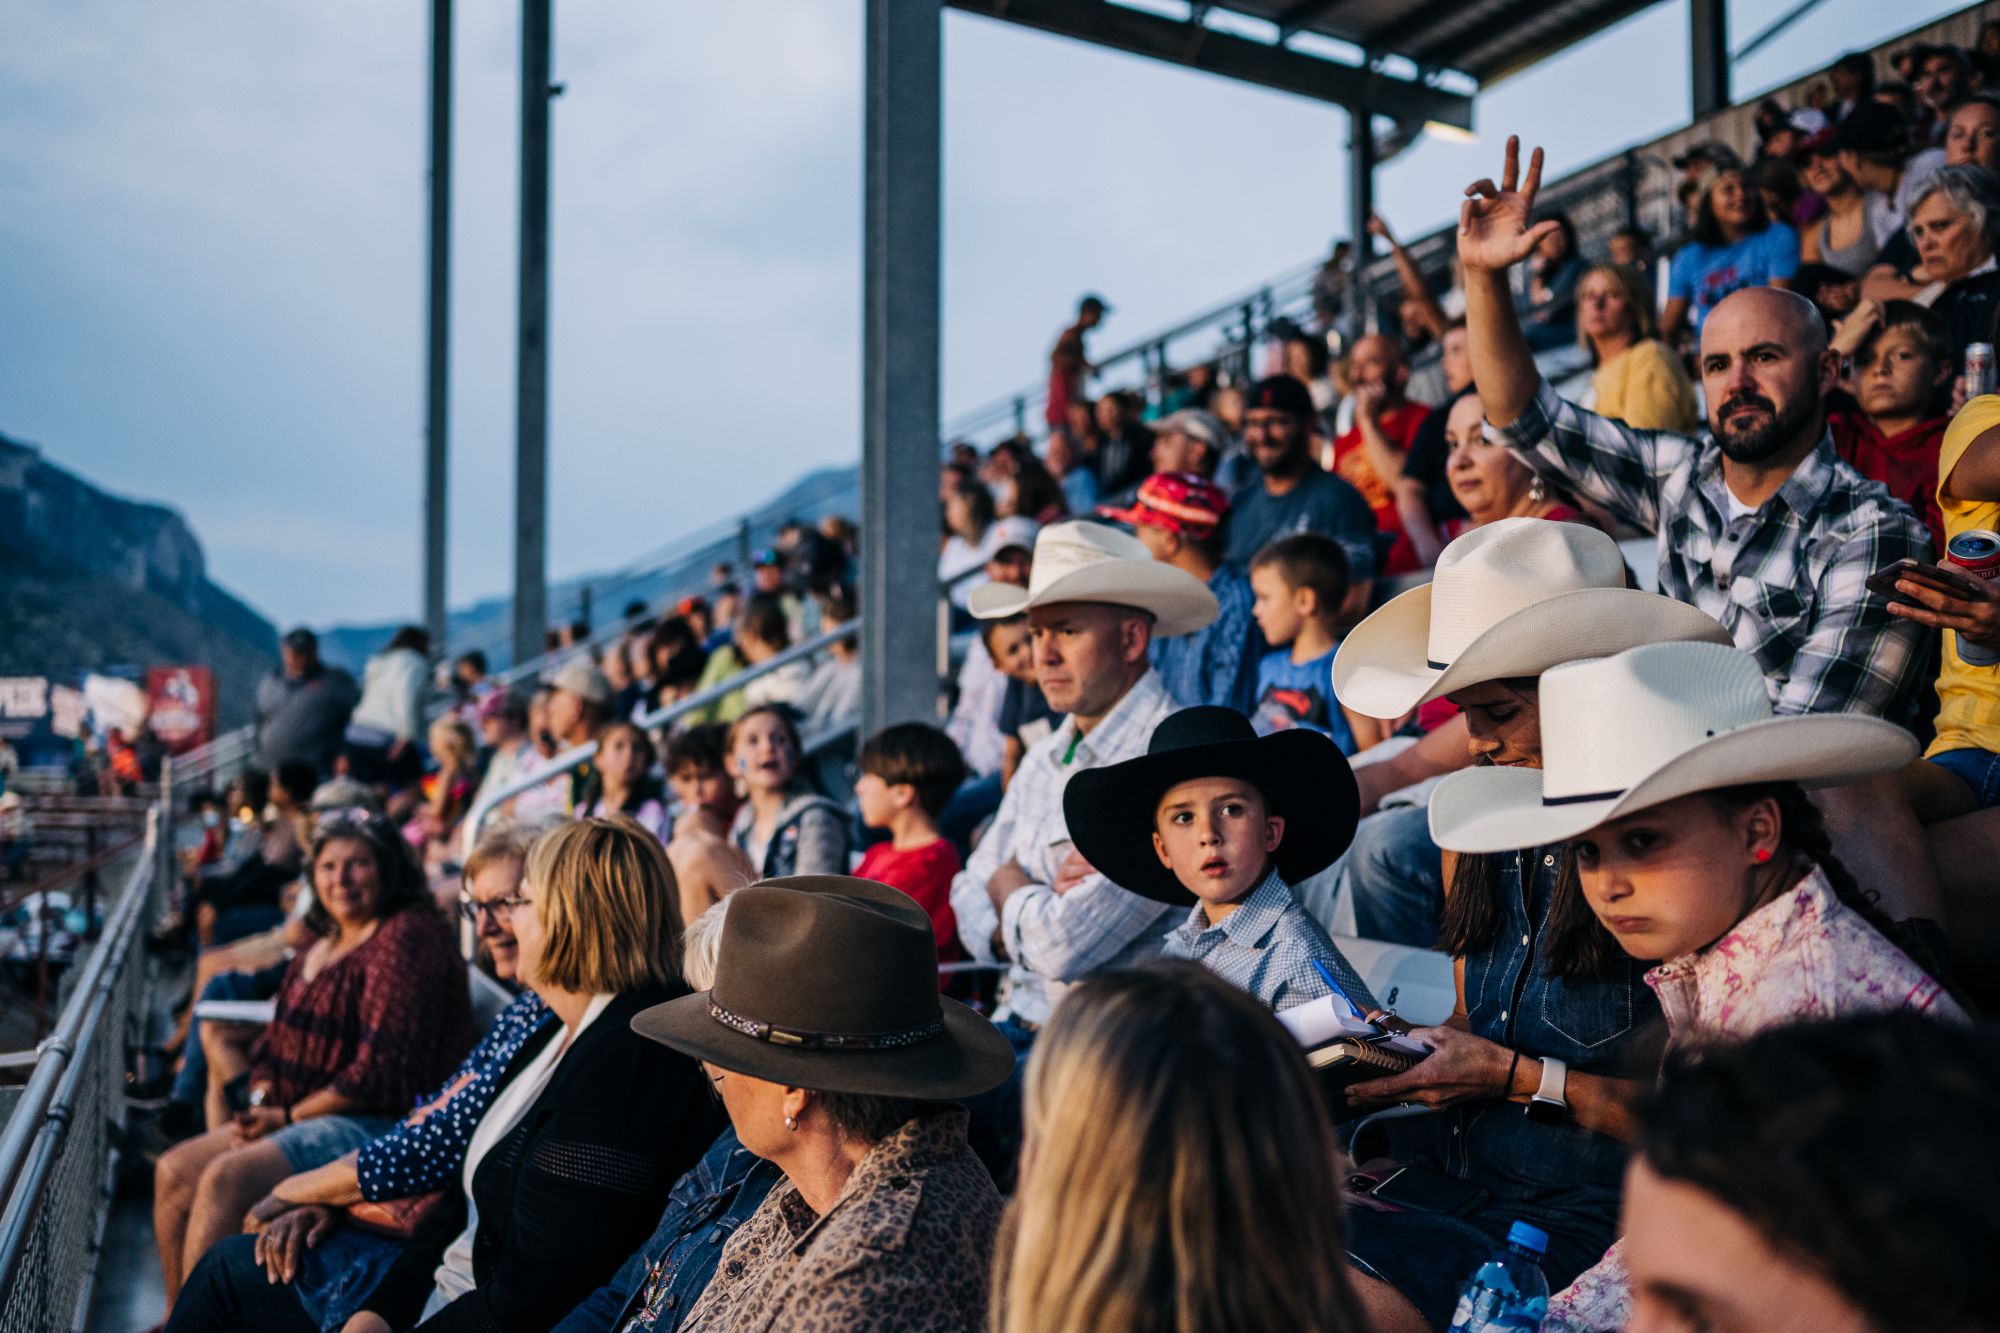 The crowd at the Cody Nite Rodeo in Cody Yellowstone